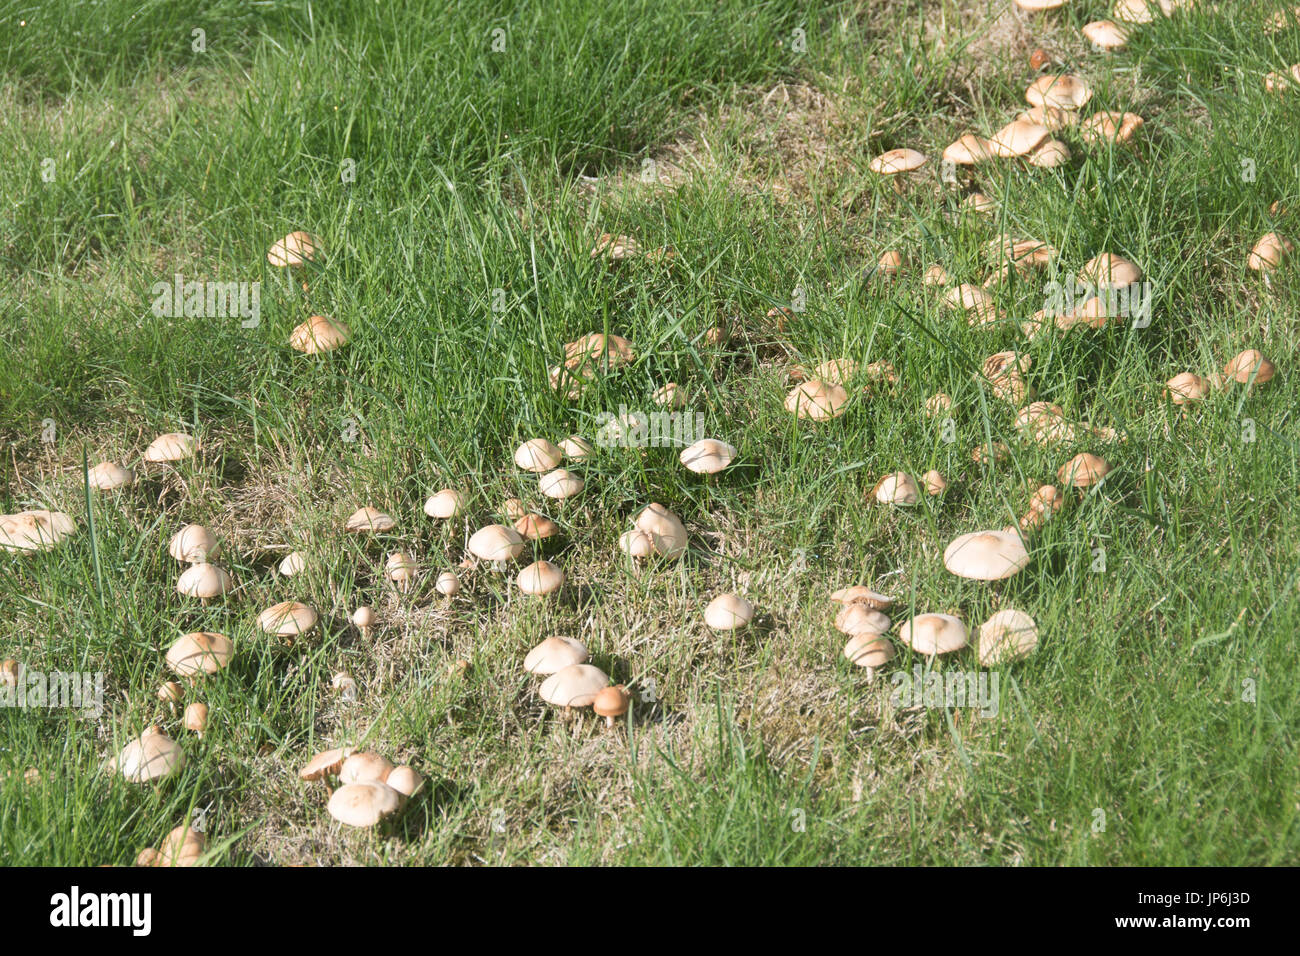 Fairy ring on lawns Stock Photo